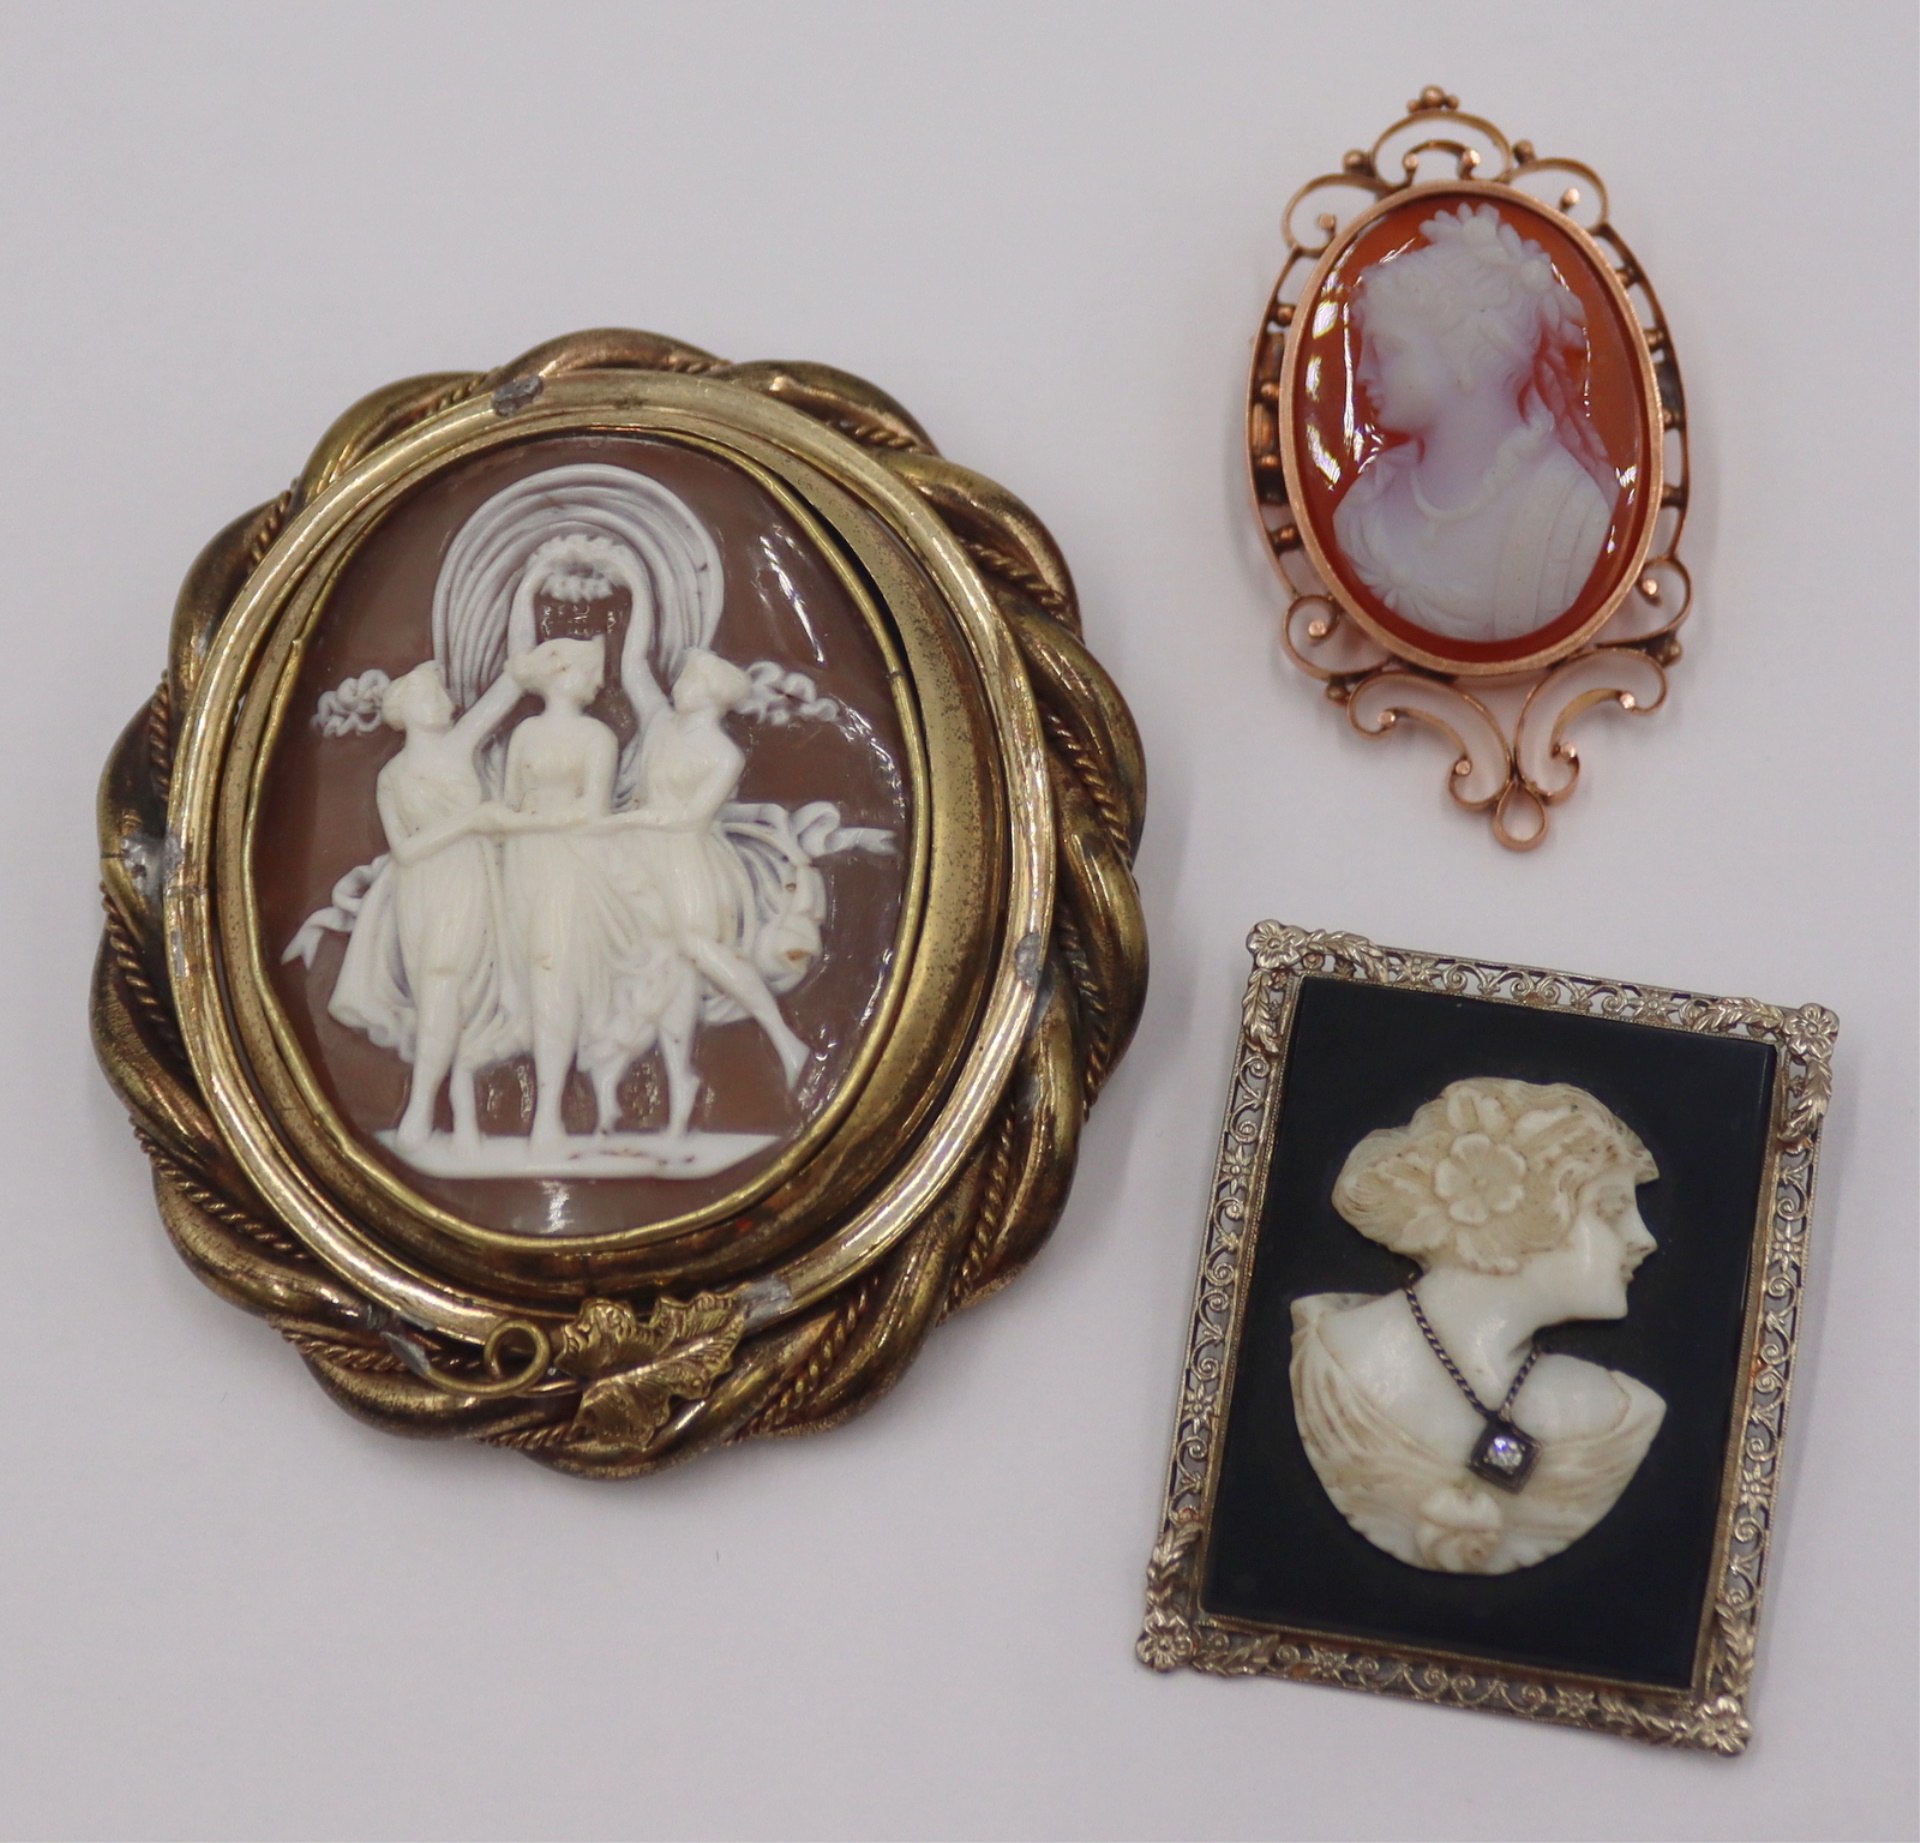 JEWELRY 3 ANTIQUE CARVED CAMEO 3bb07a